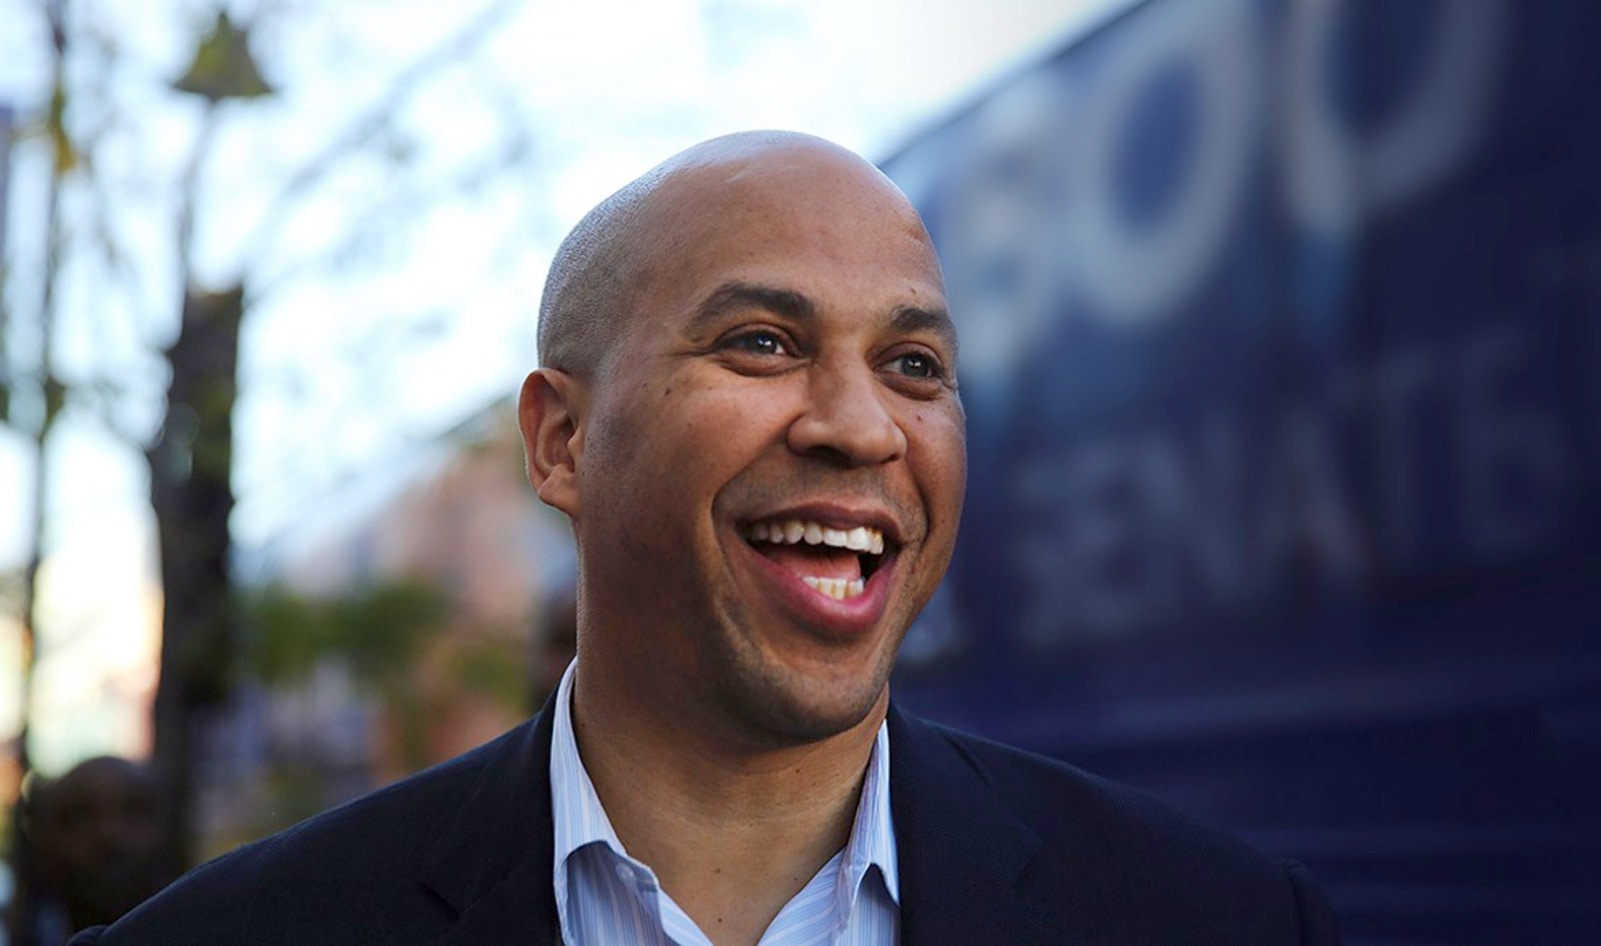 WATCH: Cory Booker Pays Tribute to World Vegan Day